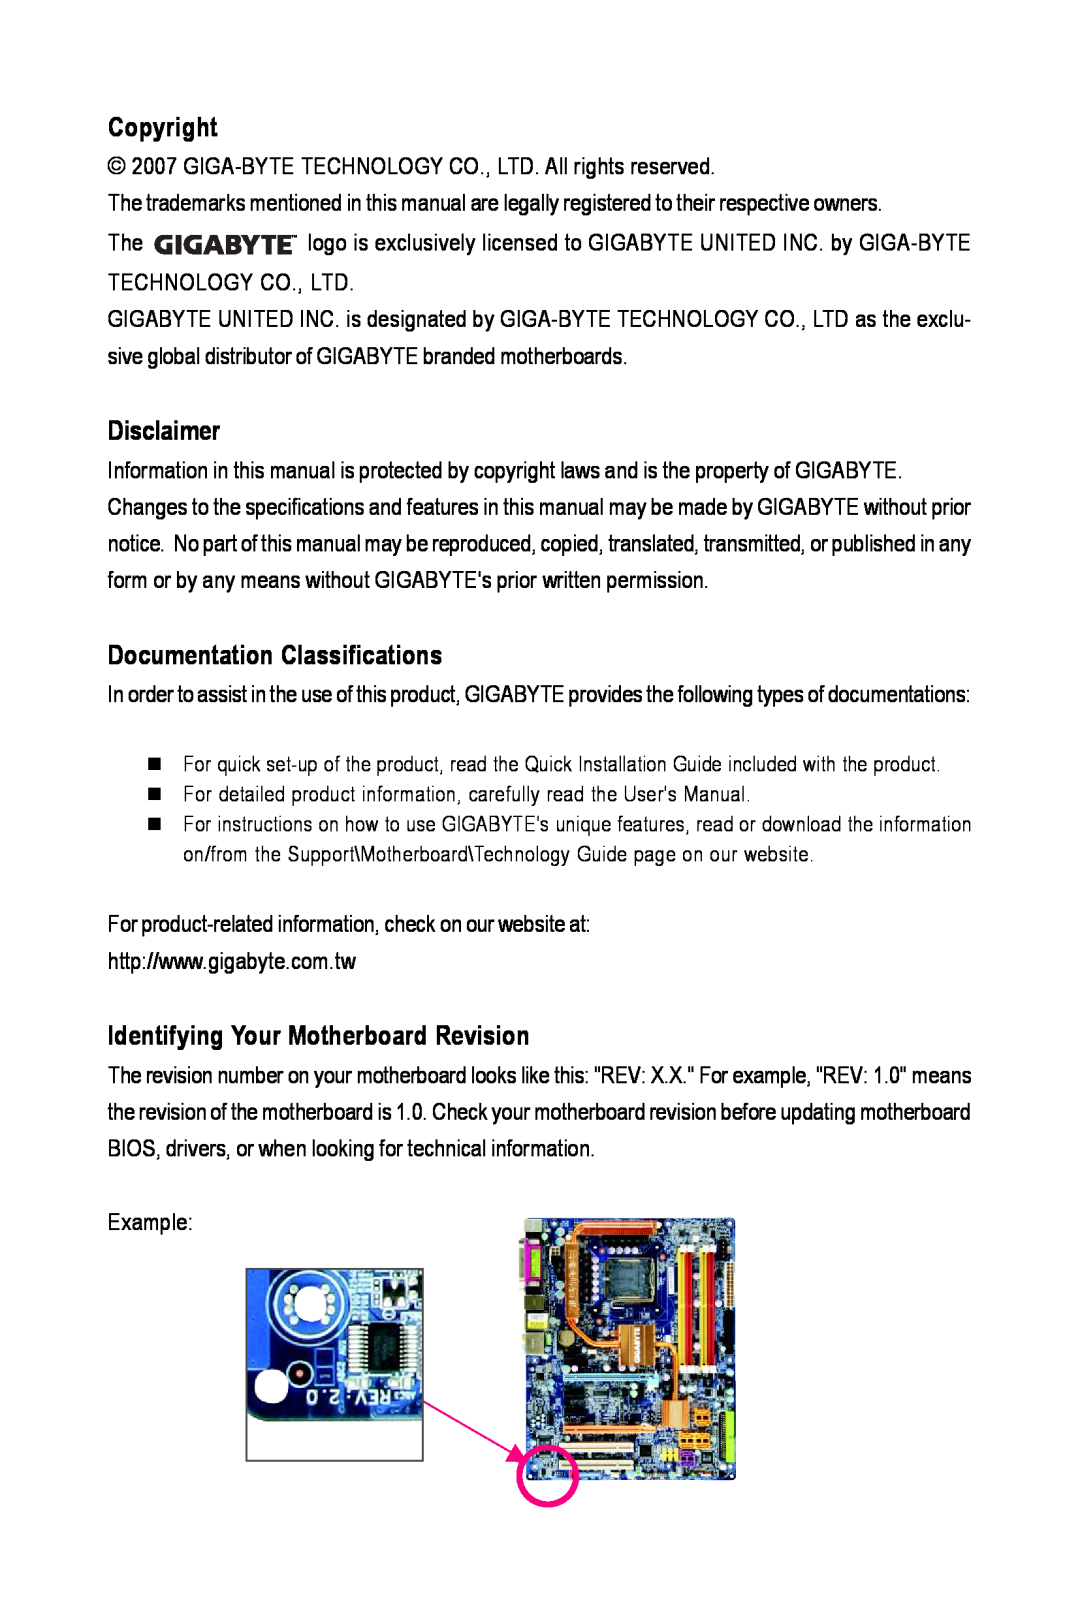 Intel GA-945PL-S3G user manual Copyright, Disclaimer, Documentation Classifications, Identifying Your Motherboard Revision 